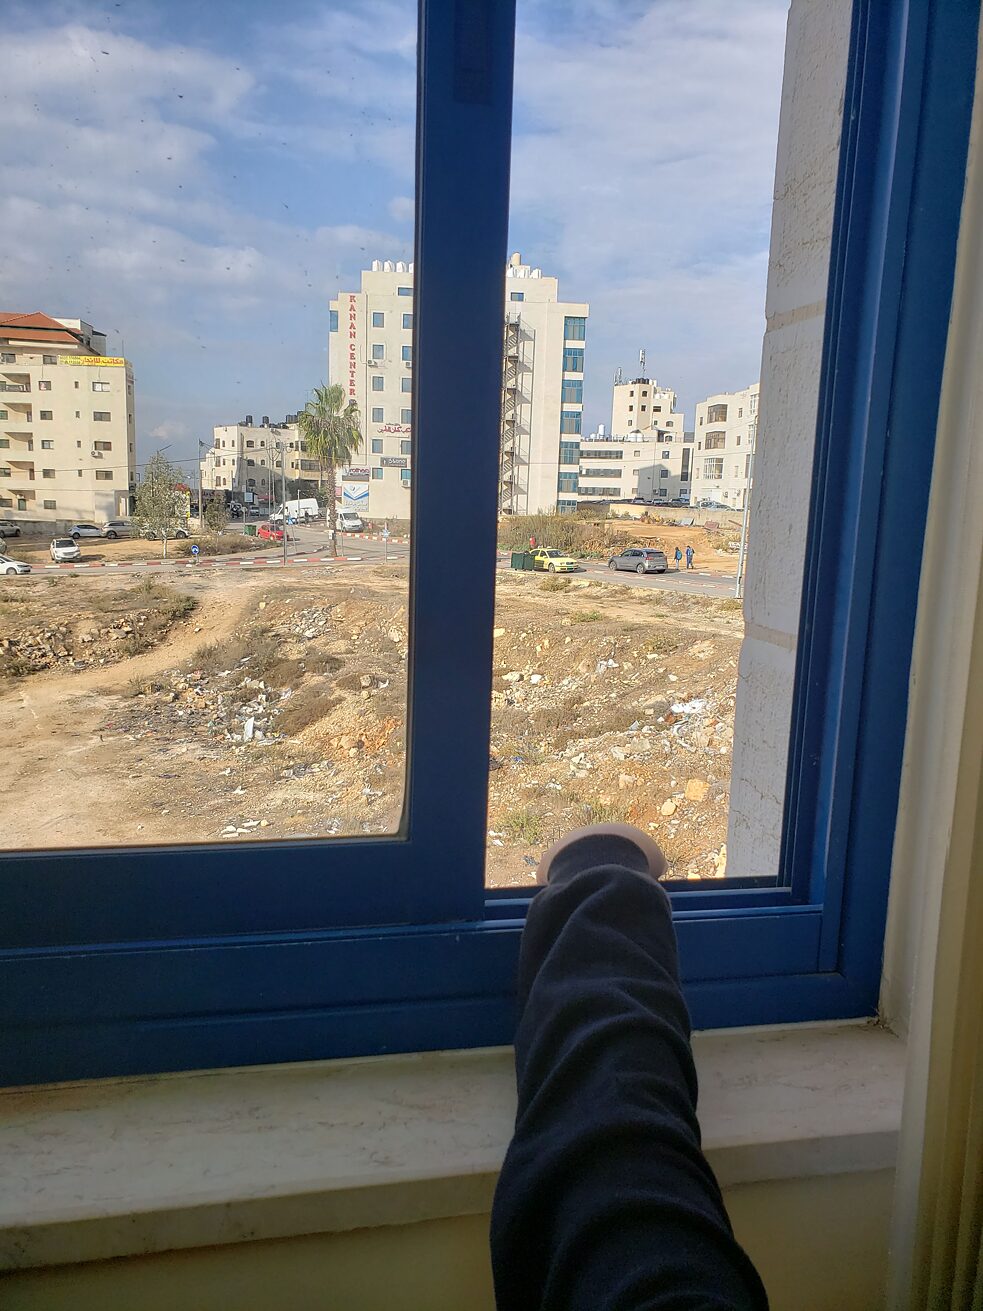 Patient Salam looks out of the window of the room in Ramallah where his therapy session with psychology specialist and counselor Hanan Walid takes place.